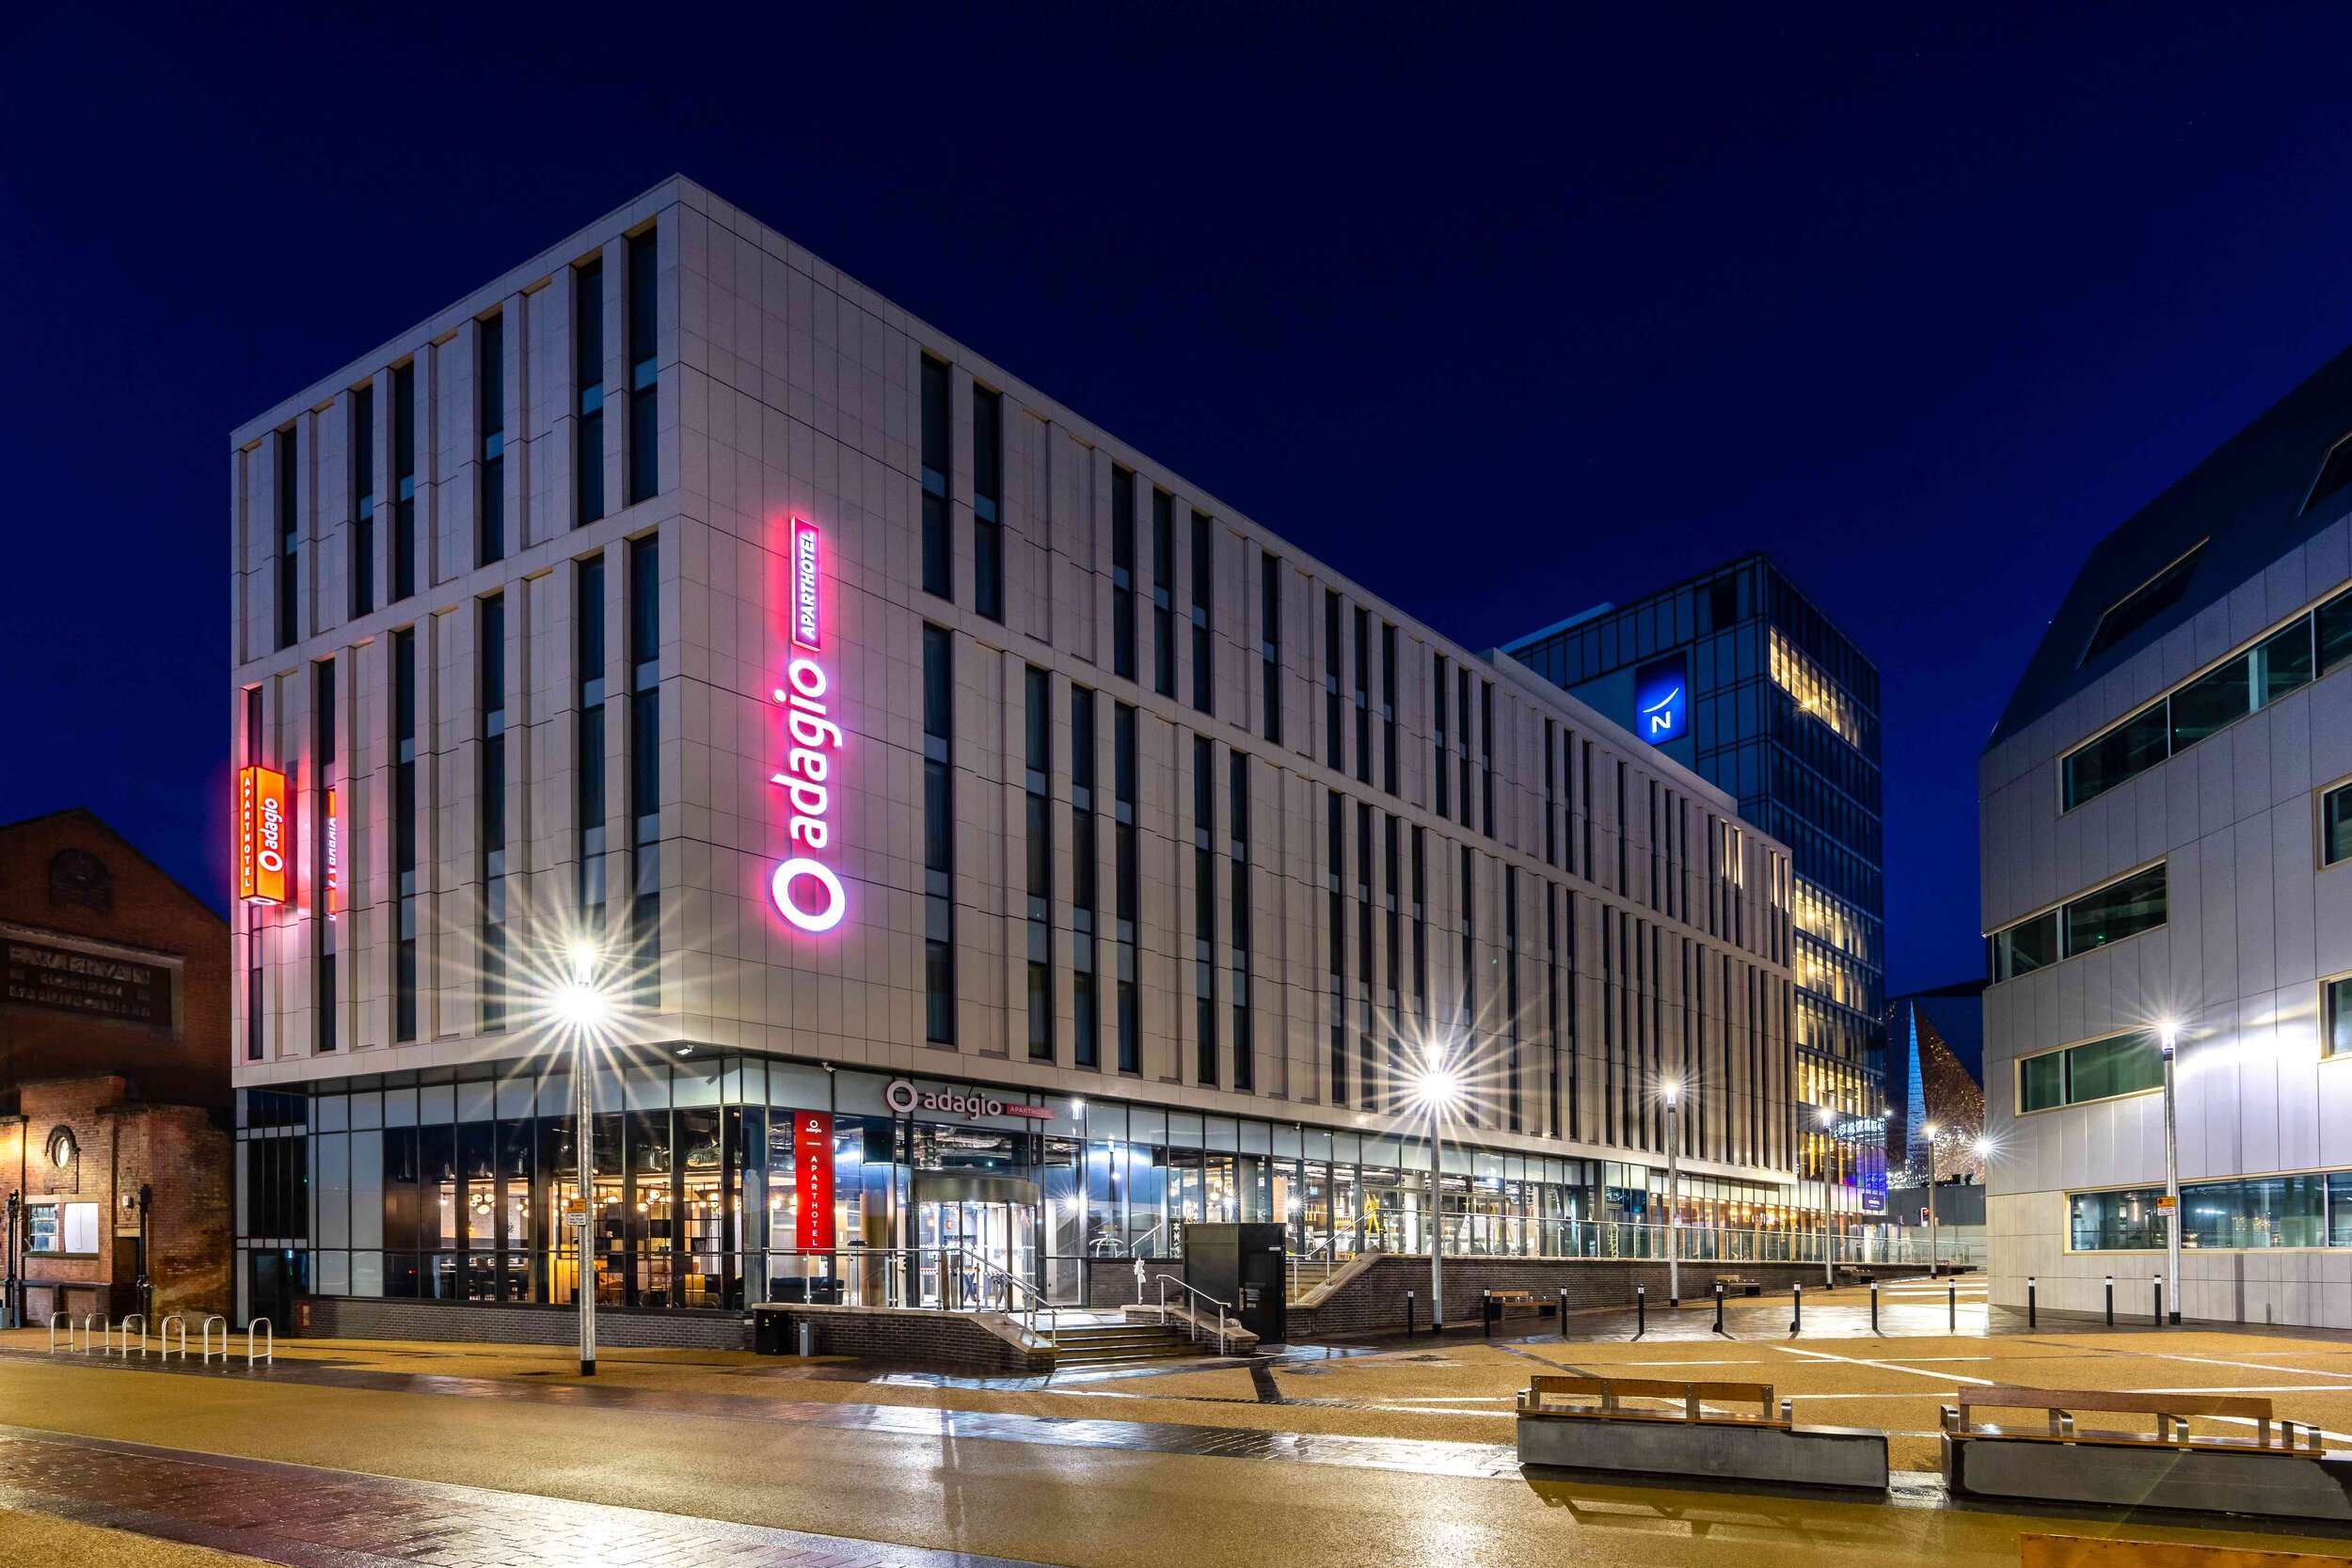 Adagio and Novotel Leicester exterior - image credit Evoke Pictures.jpeg